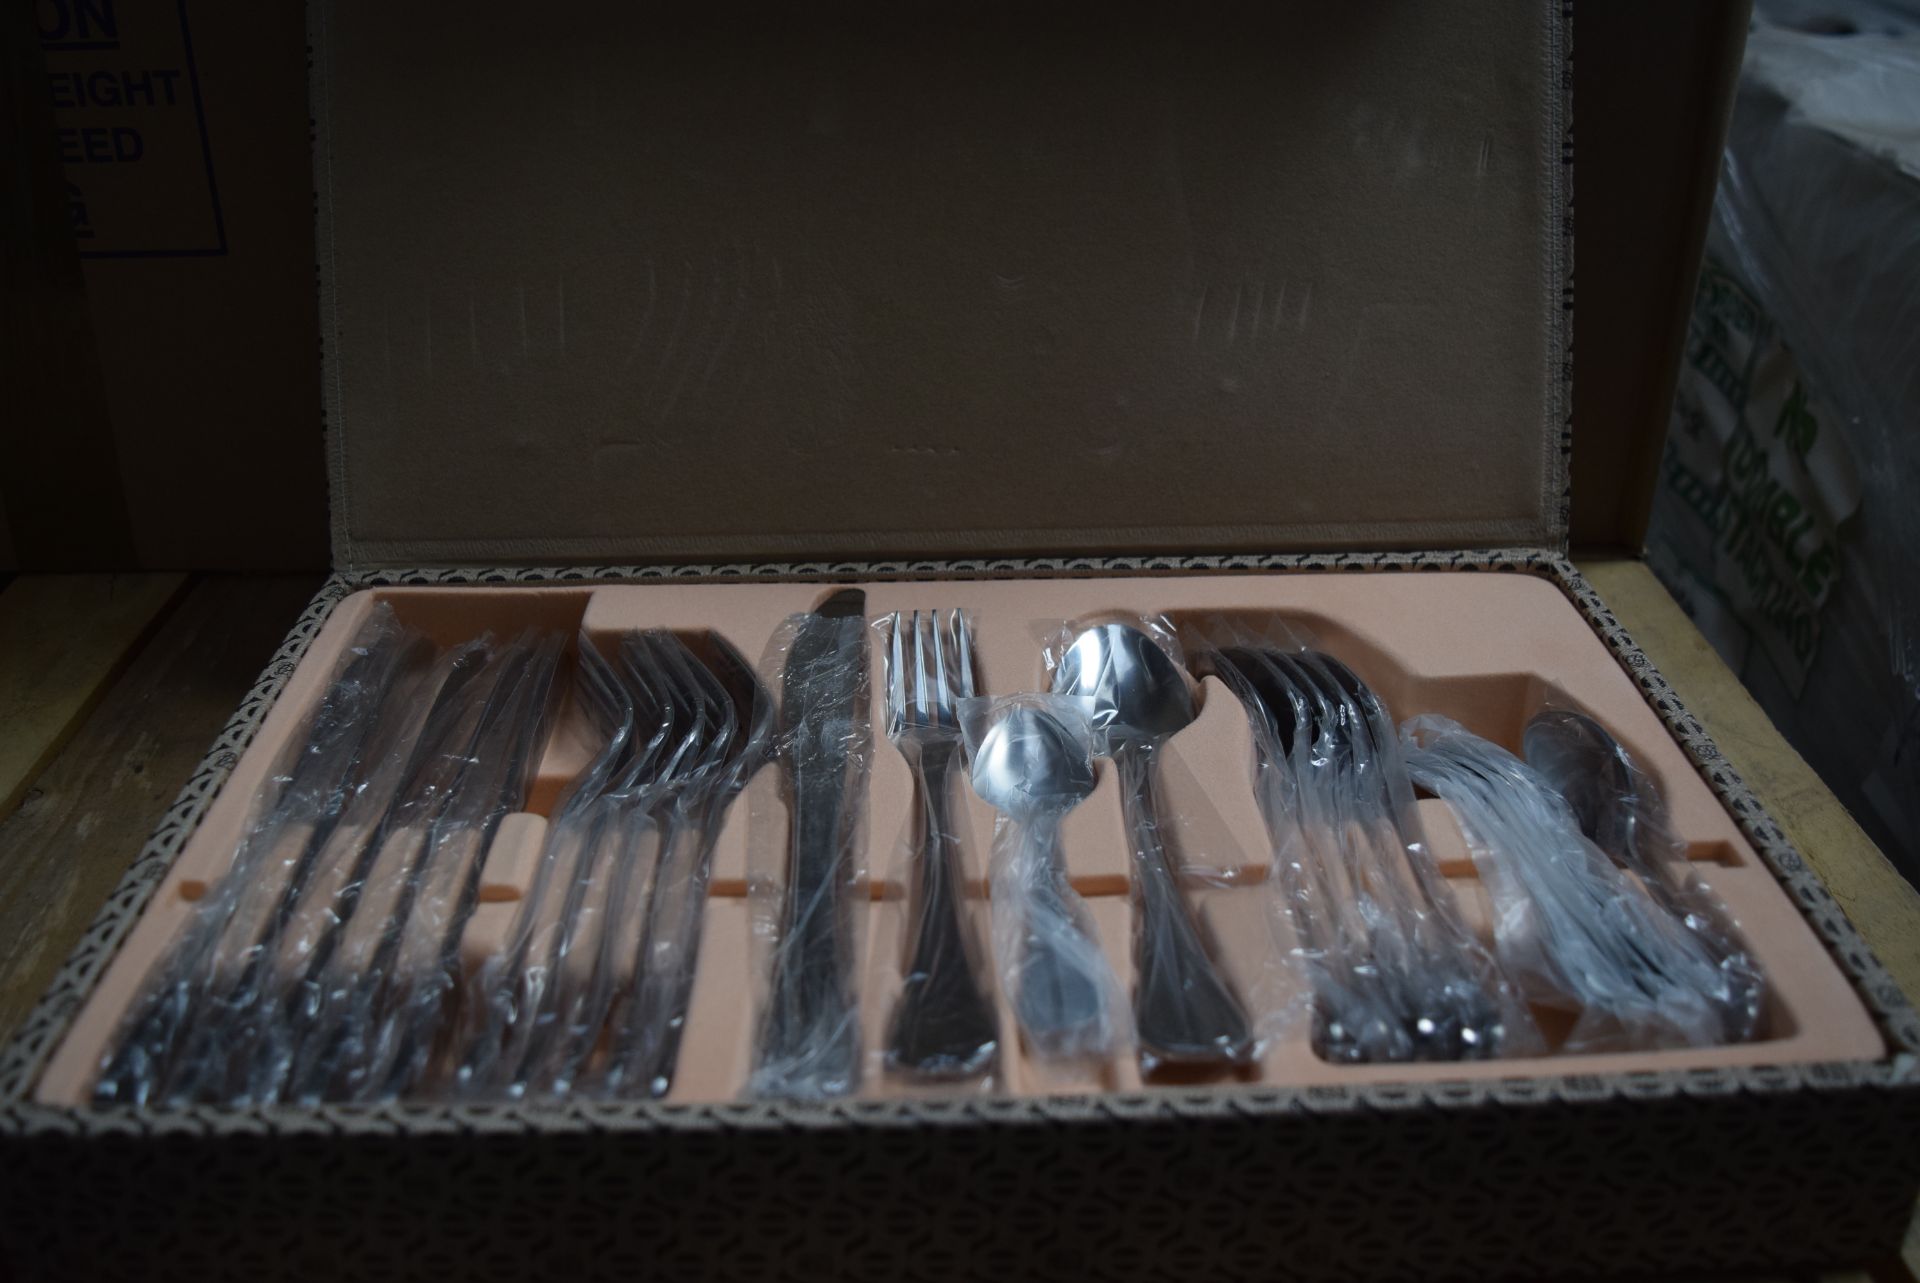 1 X BOXED BRAND NEW ROMAN CONRAD COLLECTION 24 PIECE LUXURY HOME DINING CUTLERY SET IN STAINLESS